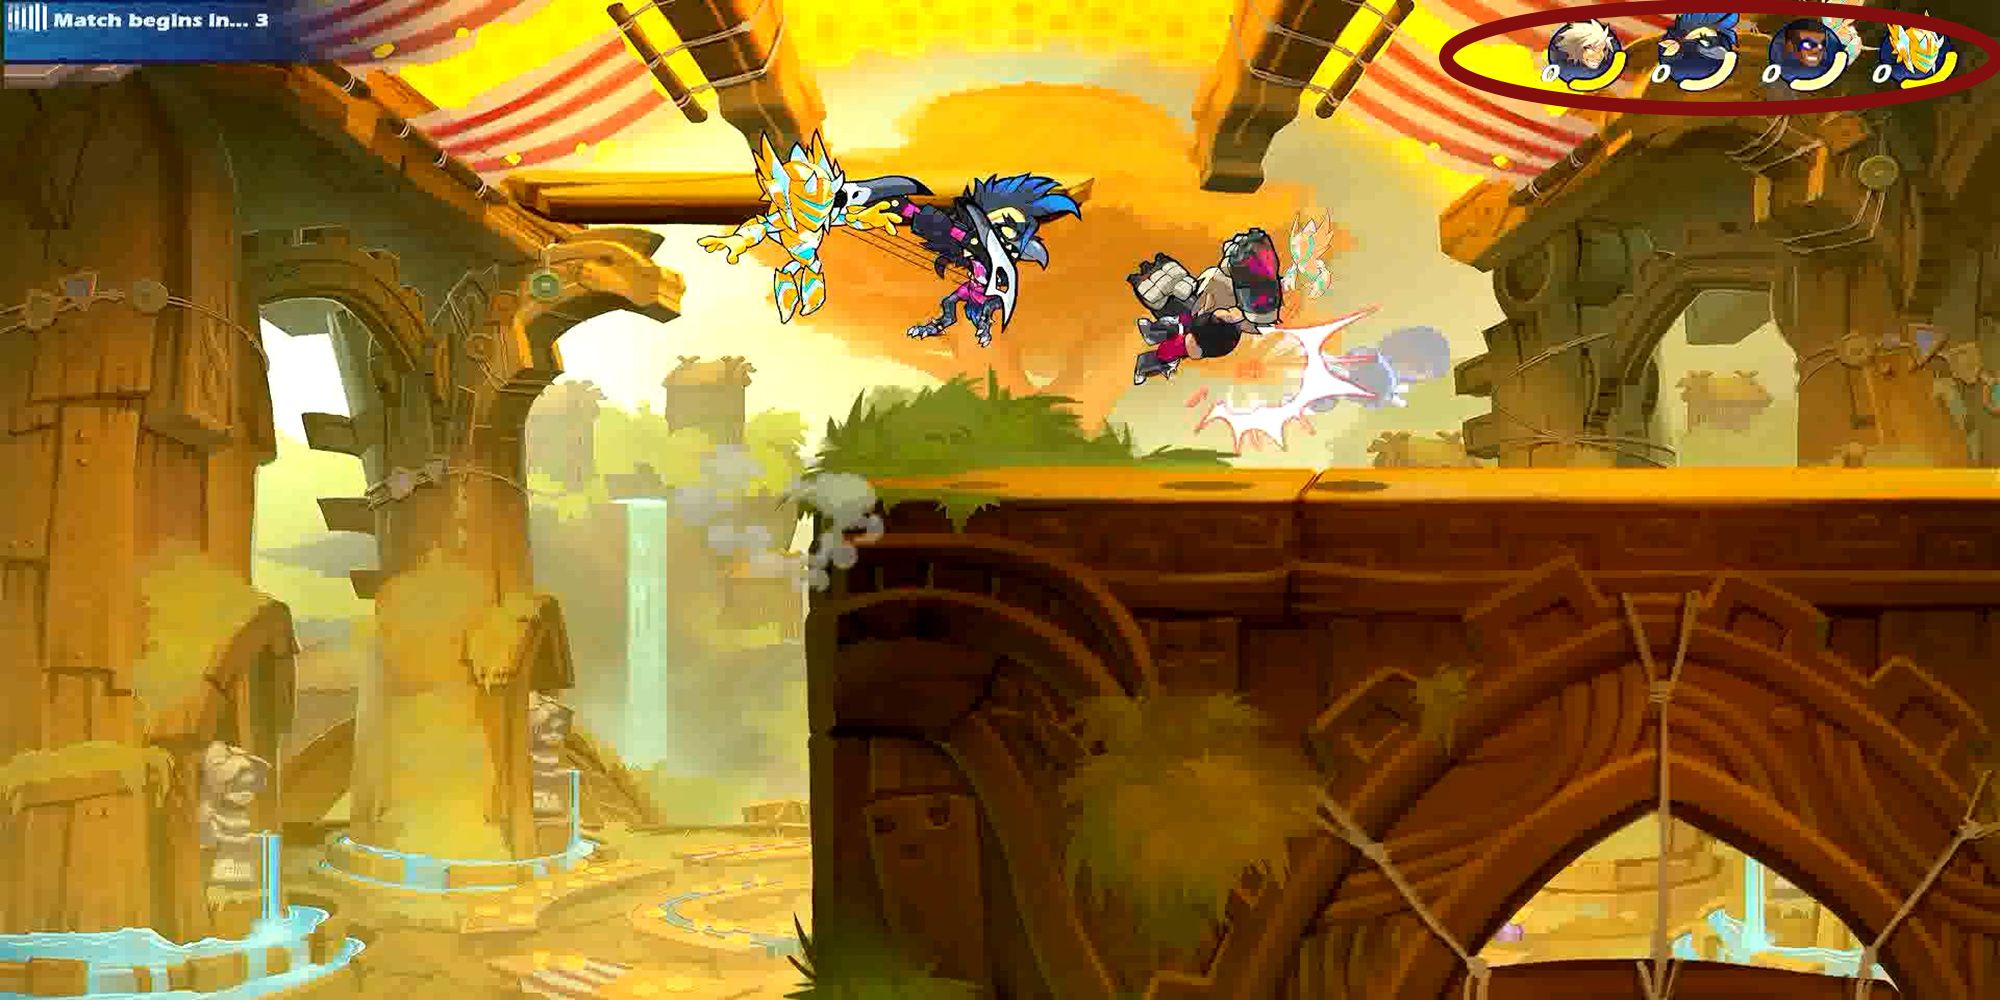 Players fight in the online waiting room in Brawlhalla. (HUD is annotated).